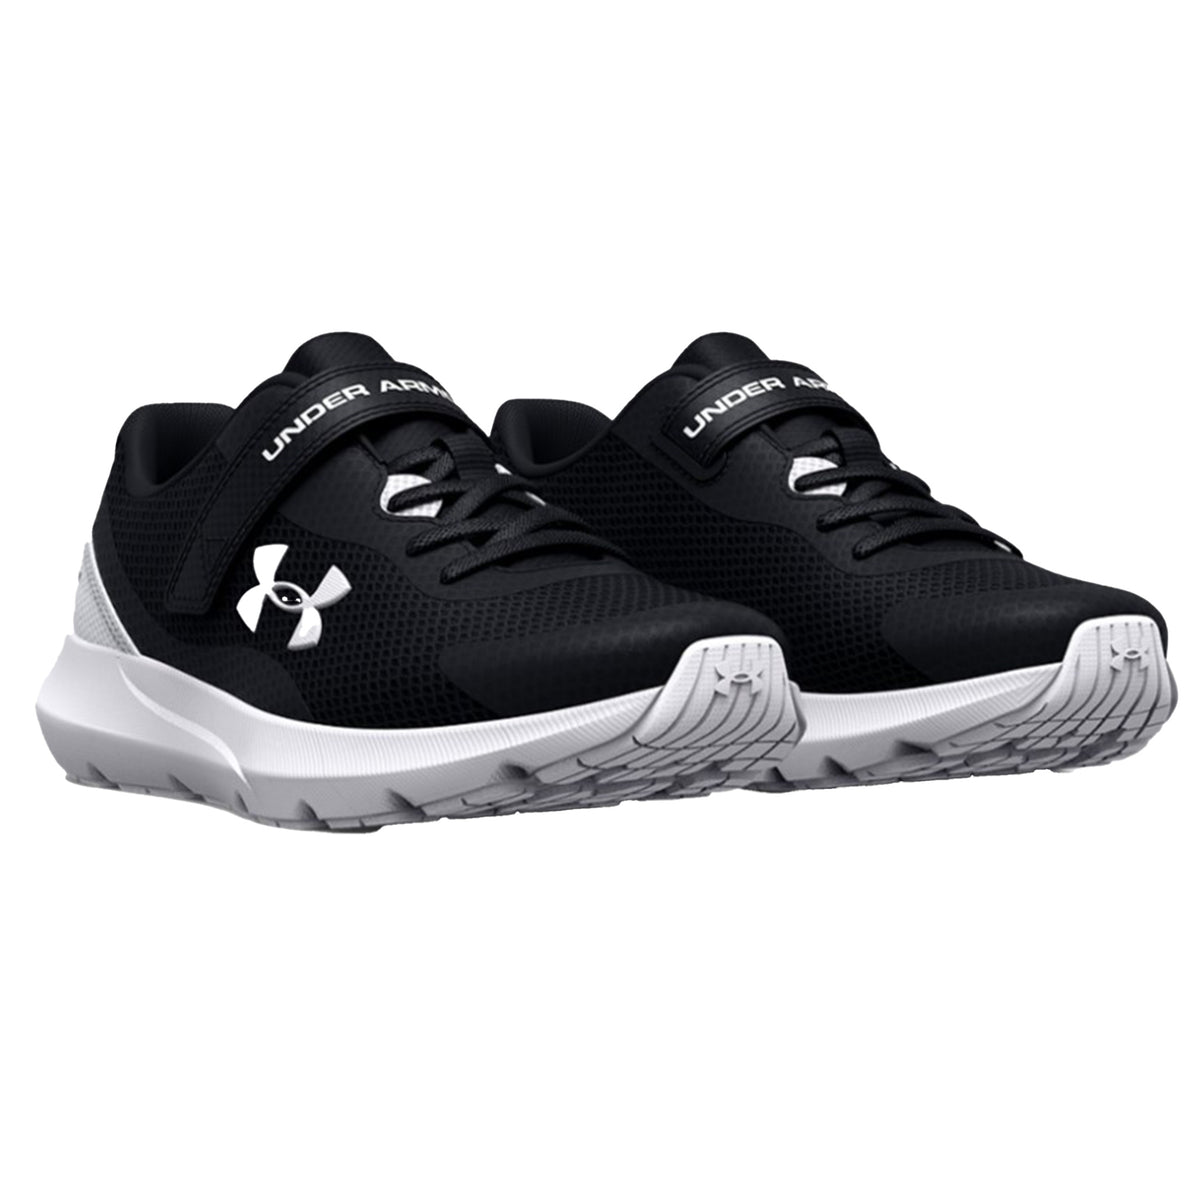 Under Armour Surge 3 Kids Running Shoes: Black/White